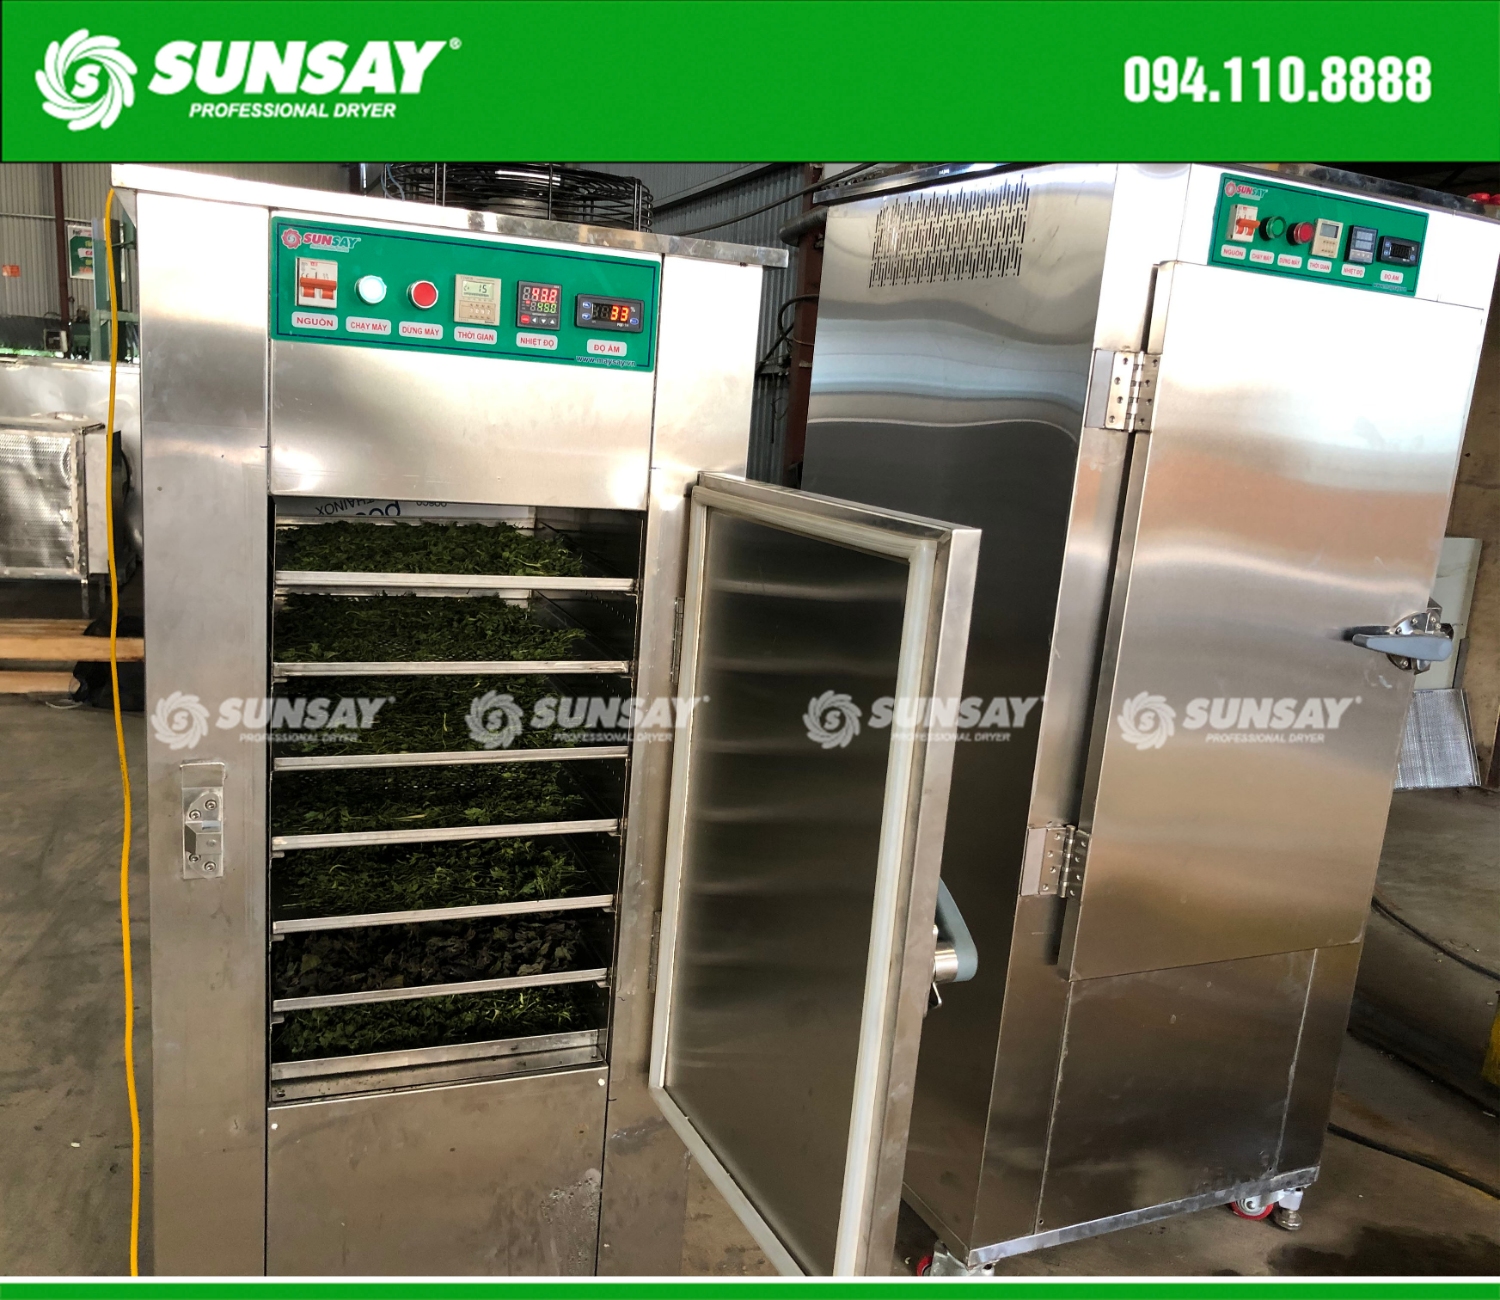 The process of making dried chili is simple with the SUNSAY dryer